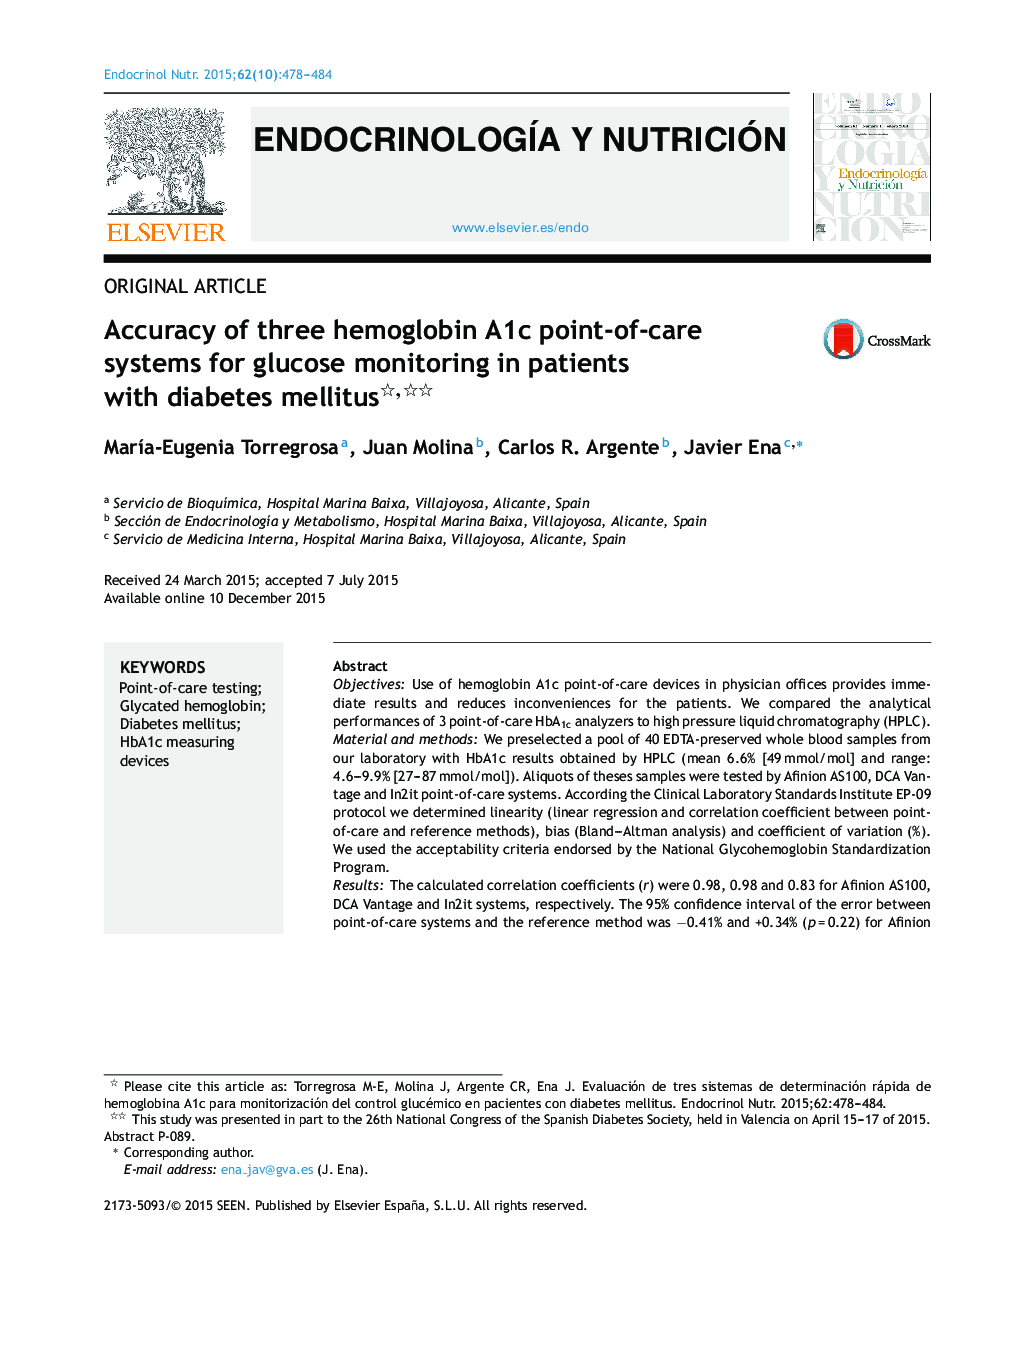 Accuracy of three hemoglobin A1c point-of-care systems for glucose monitoring in patients with diabetes mellitus 